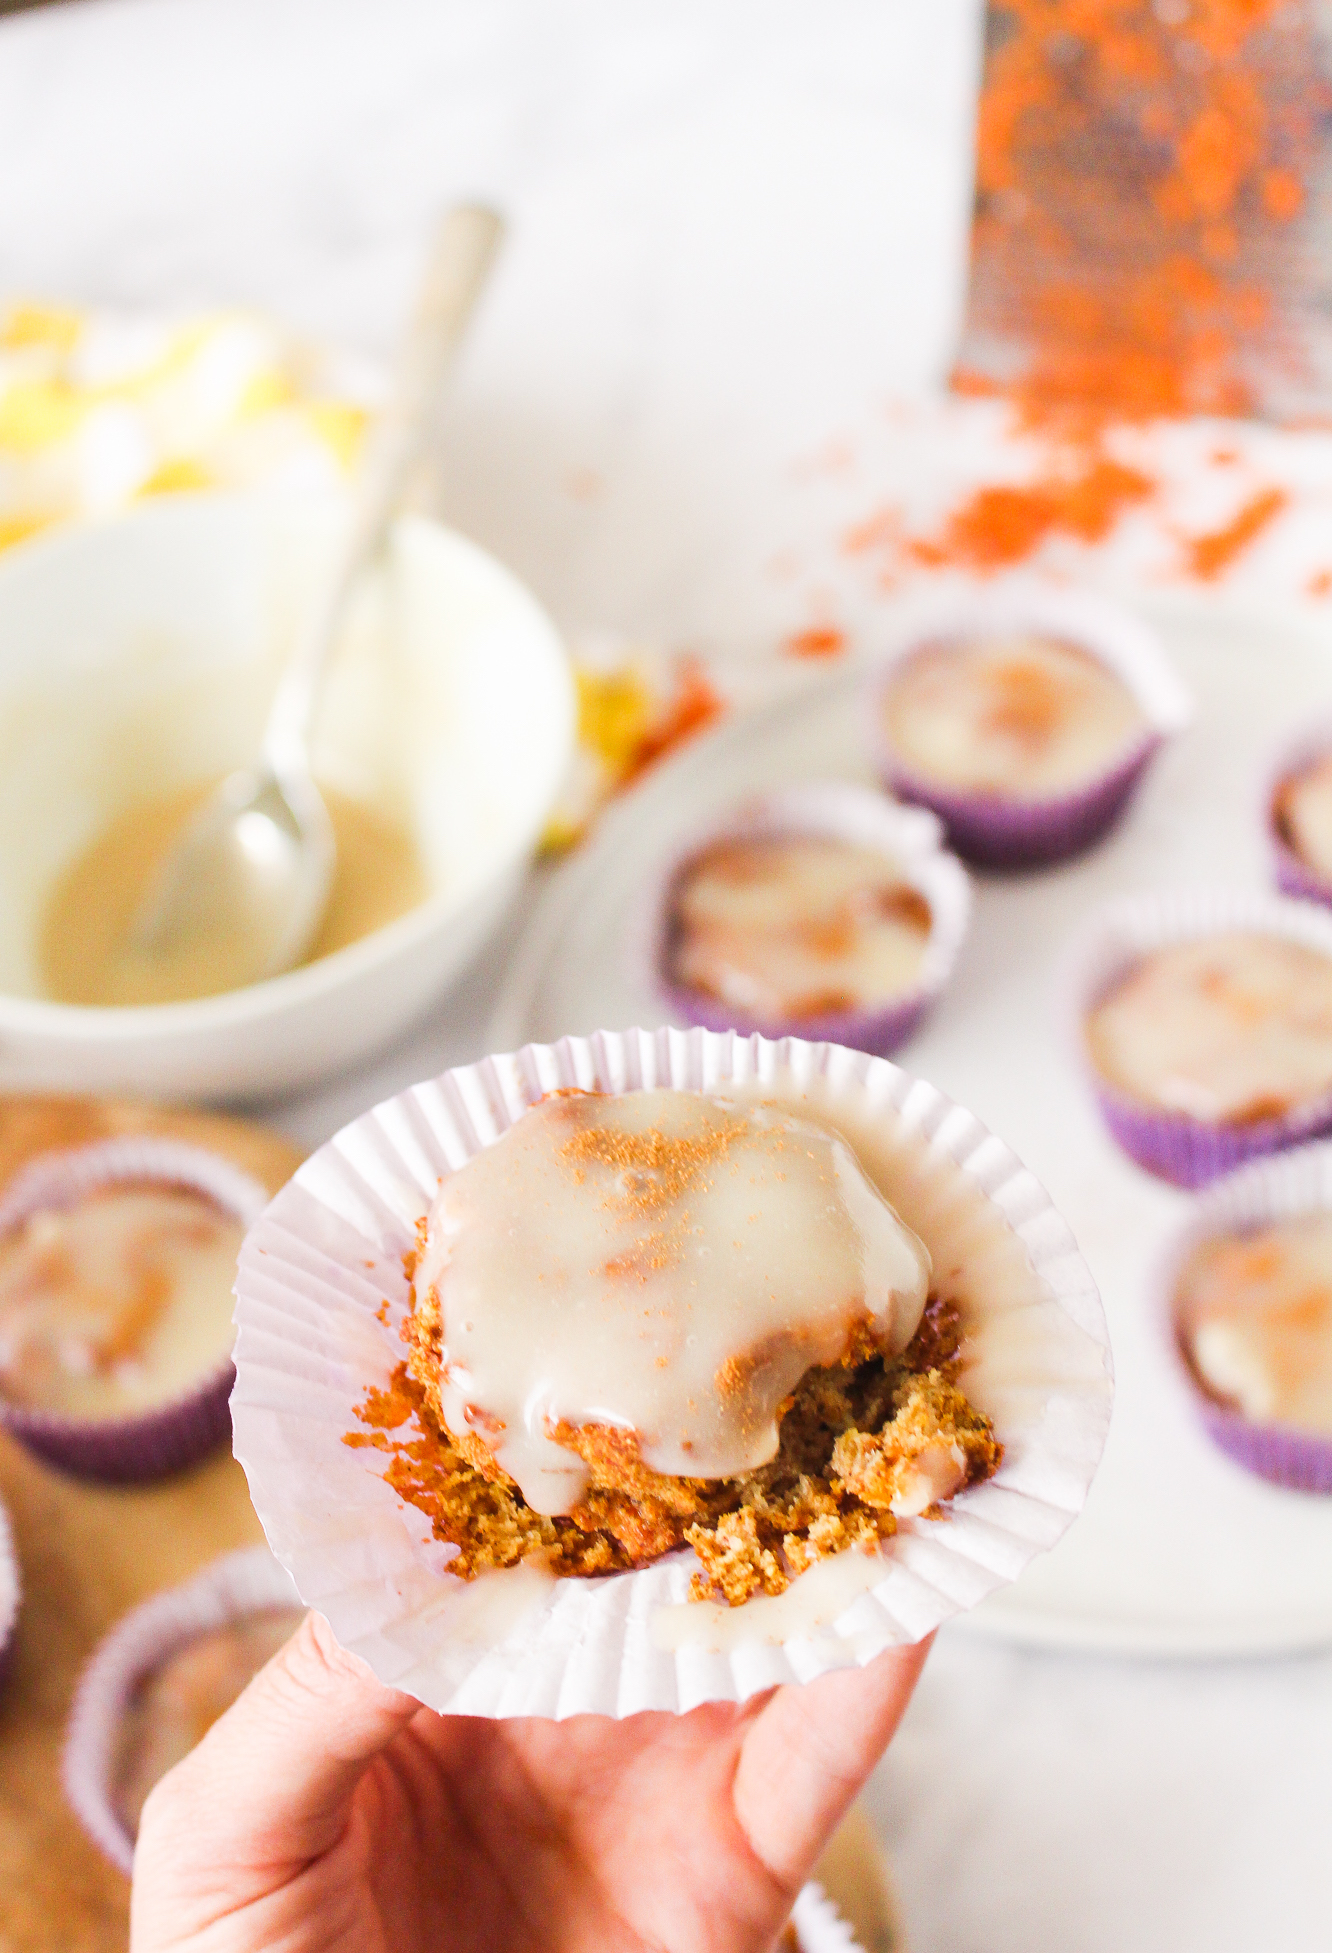 Healthy Carrot Cake Cupcakes with almond flour (gluten-free, dairy-free)